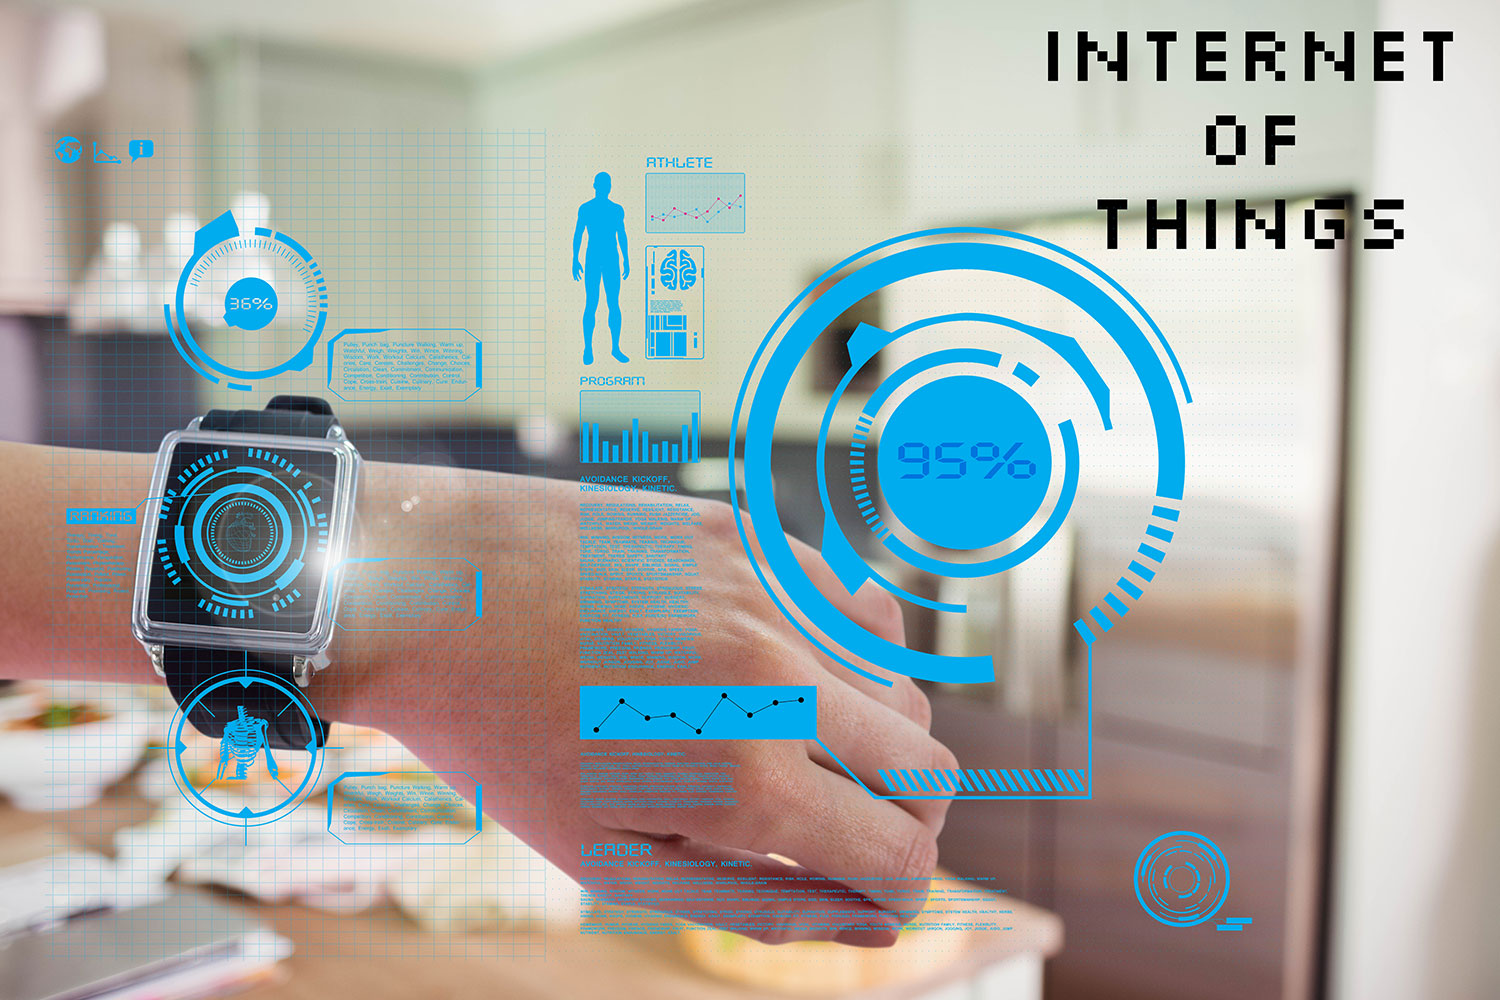 ready-to-use-iot-platform-that-enables-businesses-to-market-quickly-and-increase-operational-efficiency